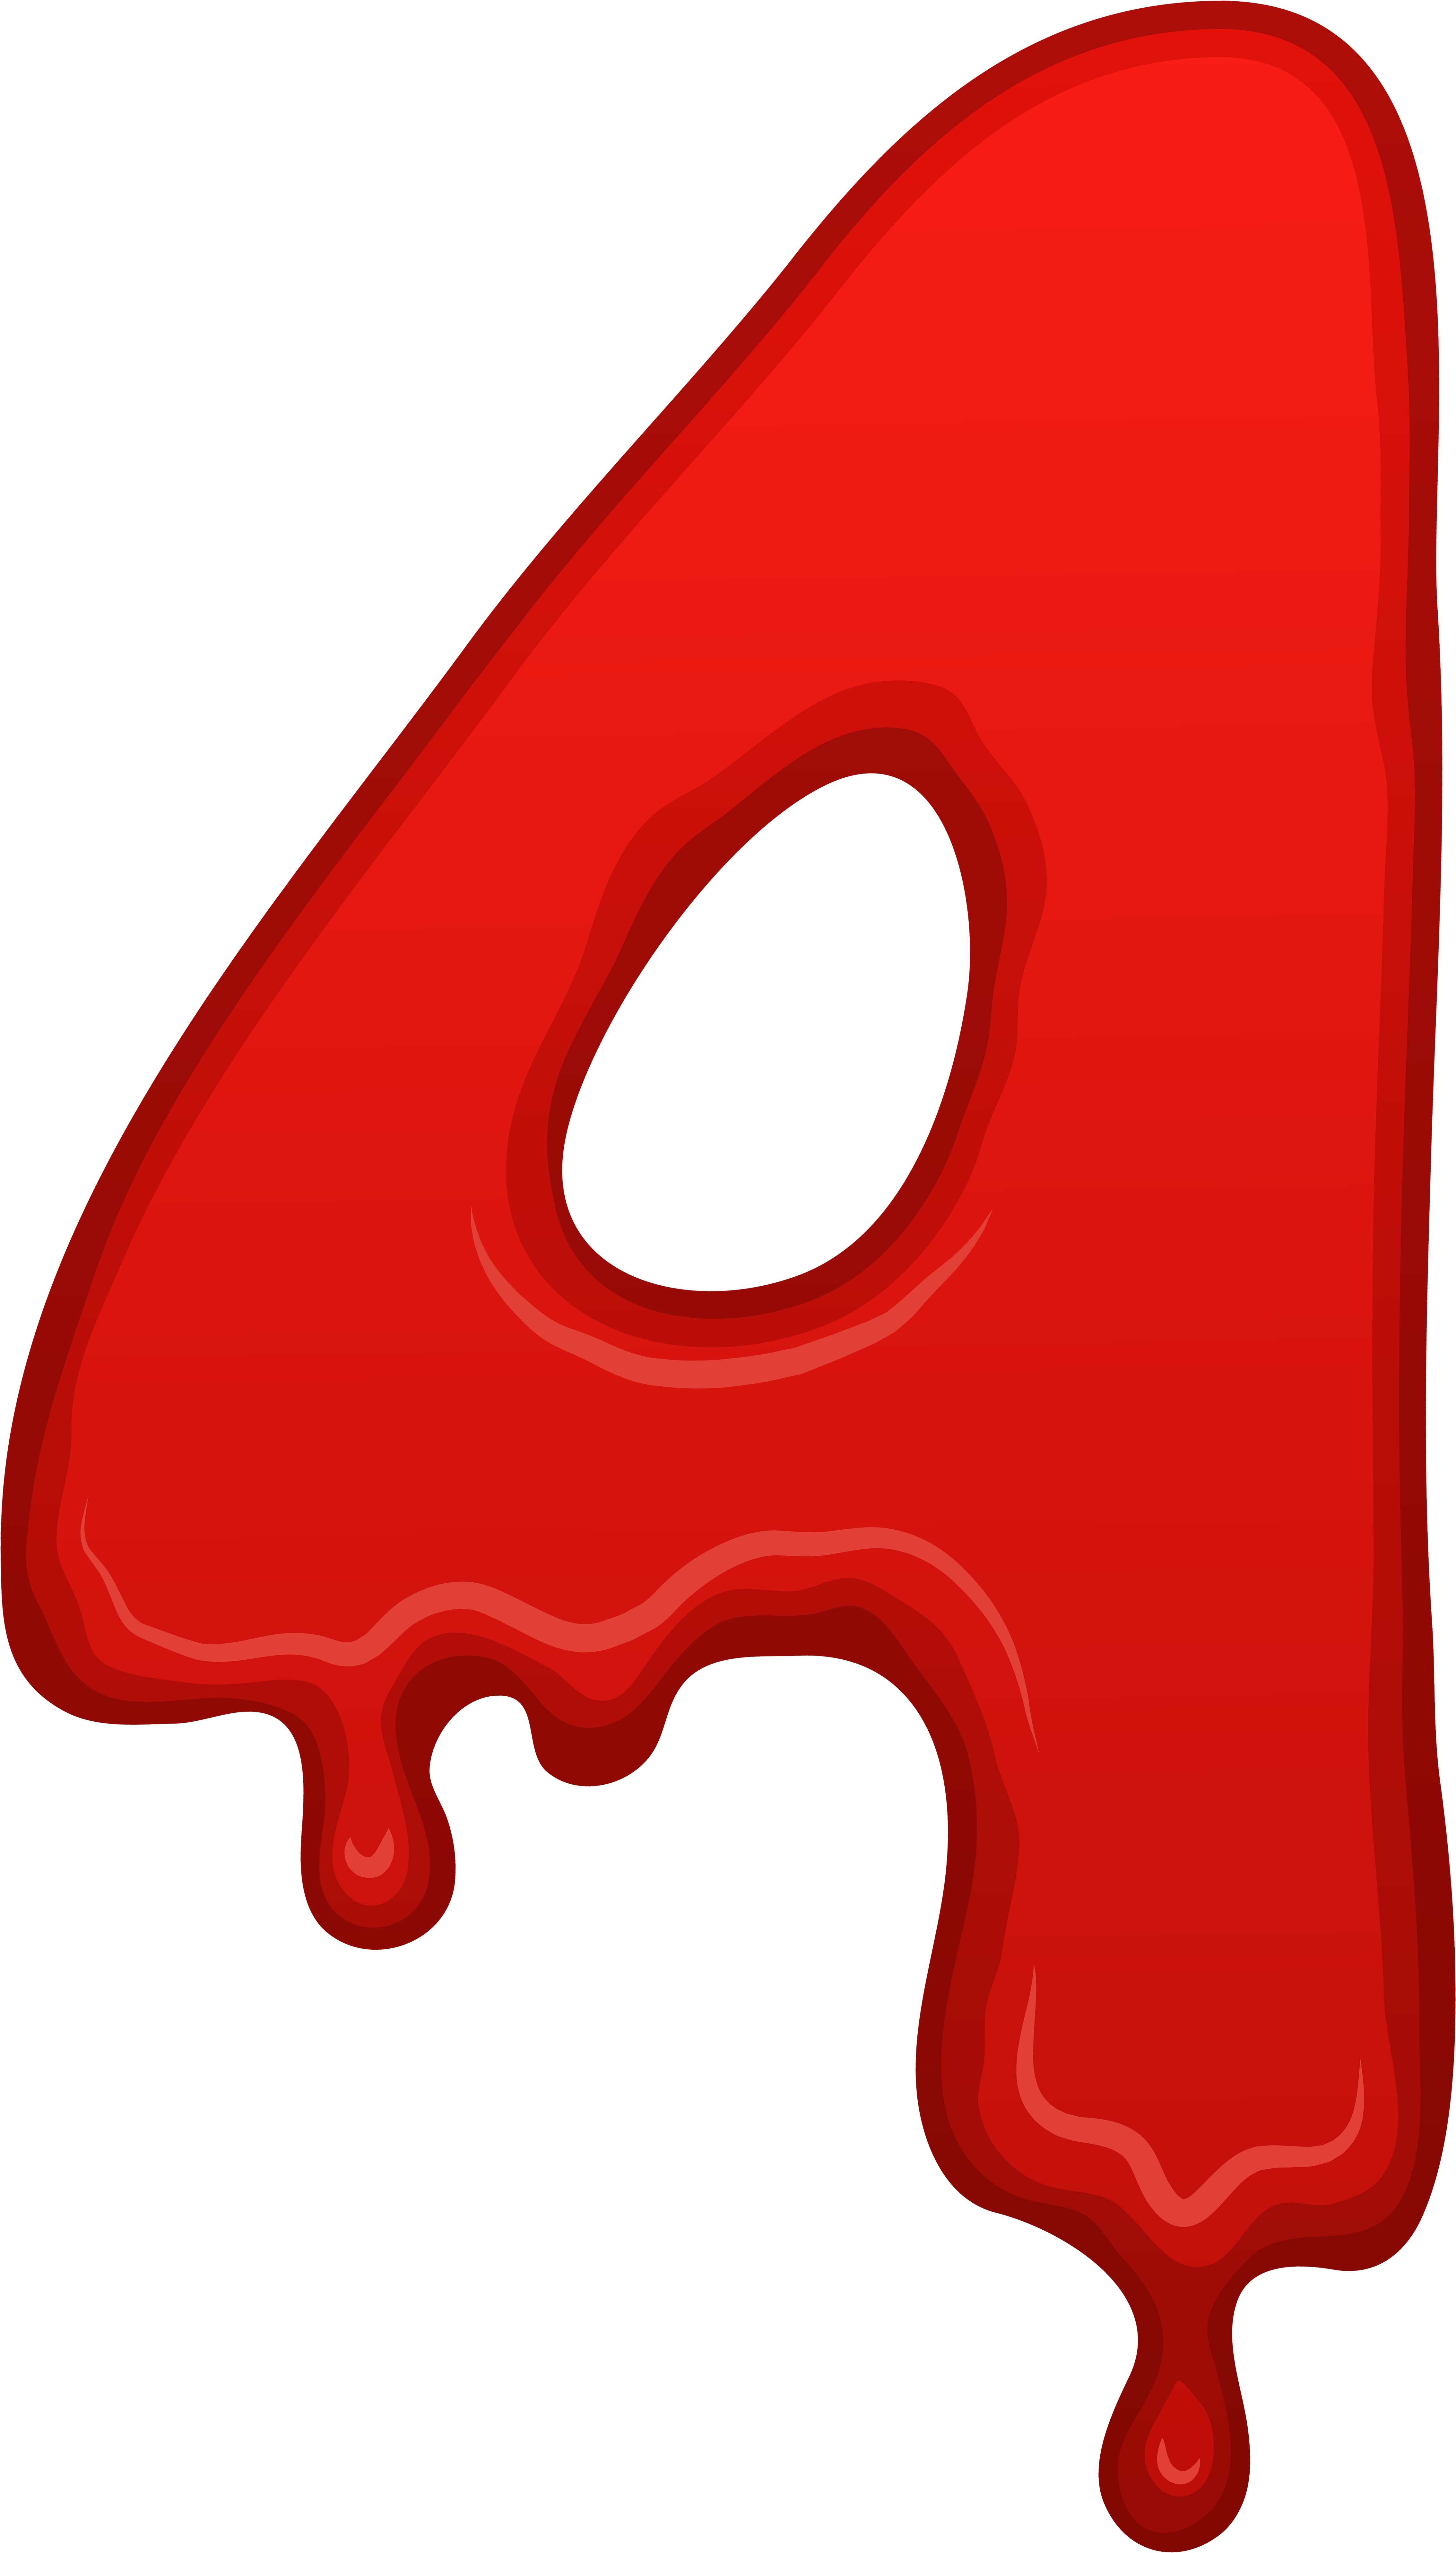 Red Melting Letter A Graphic